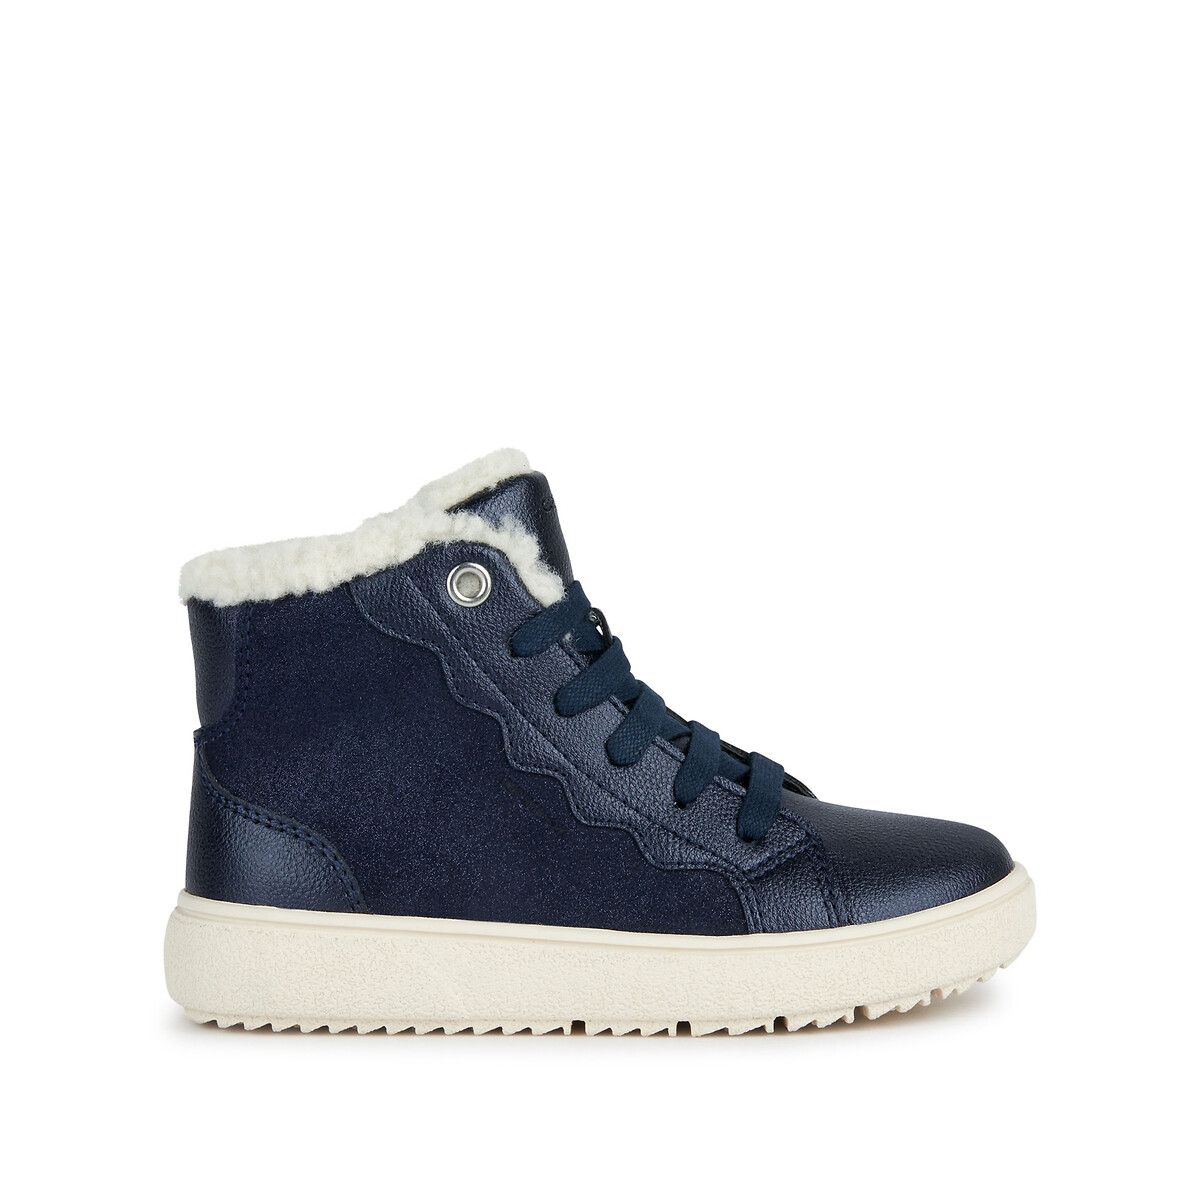 Kids Theleven High Top Trainers in Leather with Faux Fur Lining